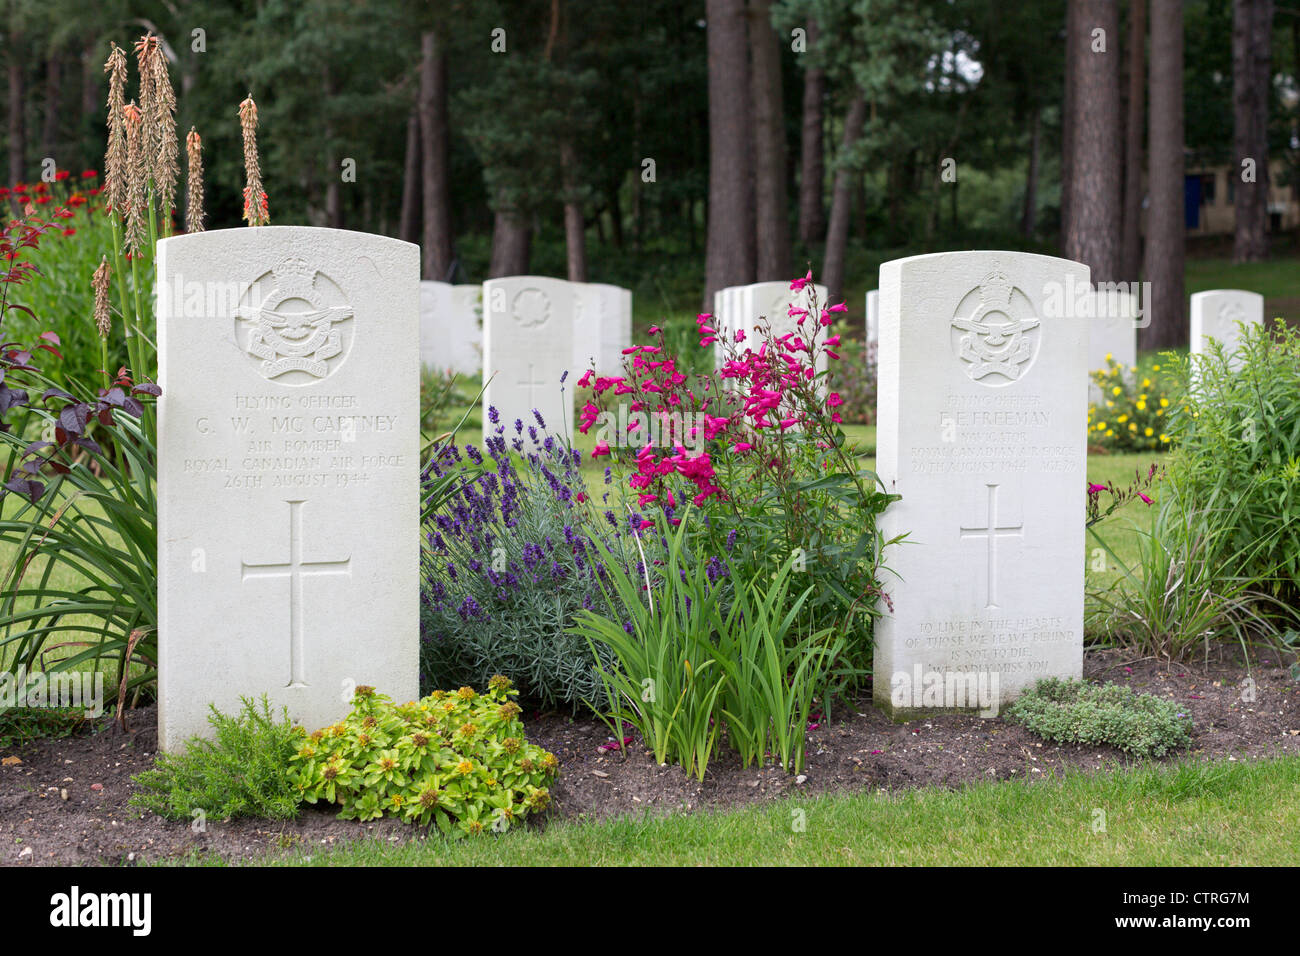 Flowers in bloom around the military grave markers at Brookwood Cemetery Stock Photo